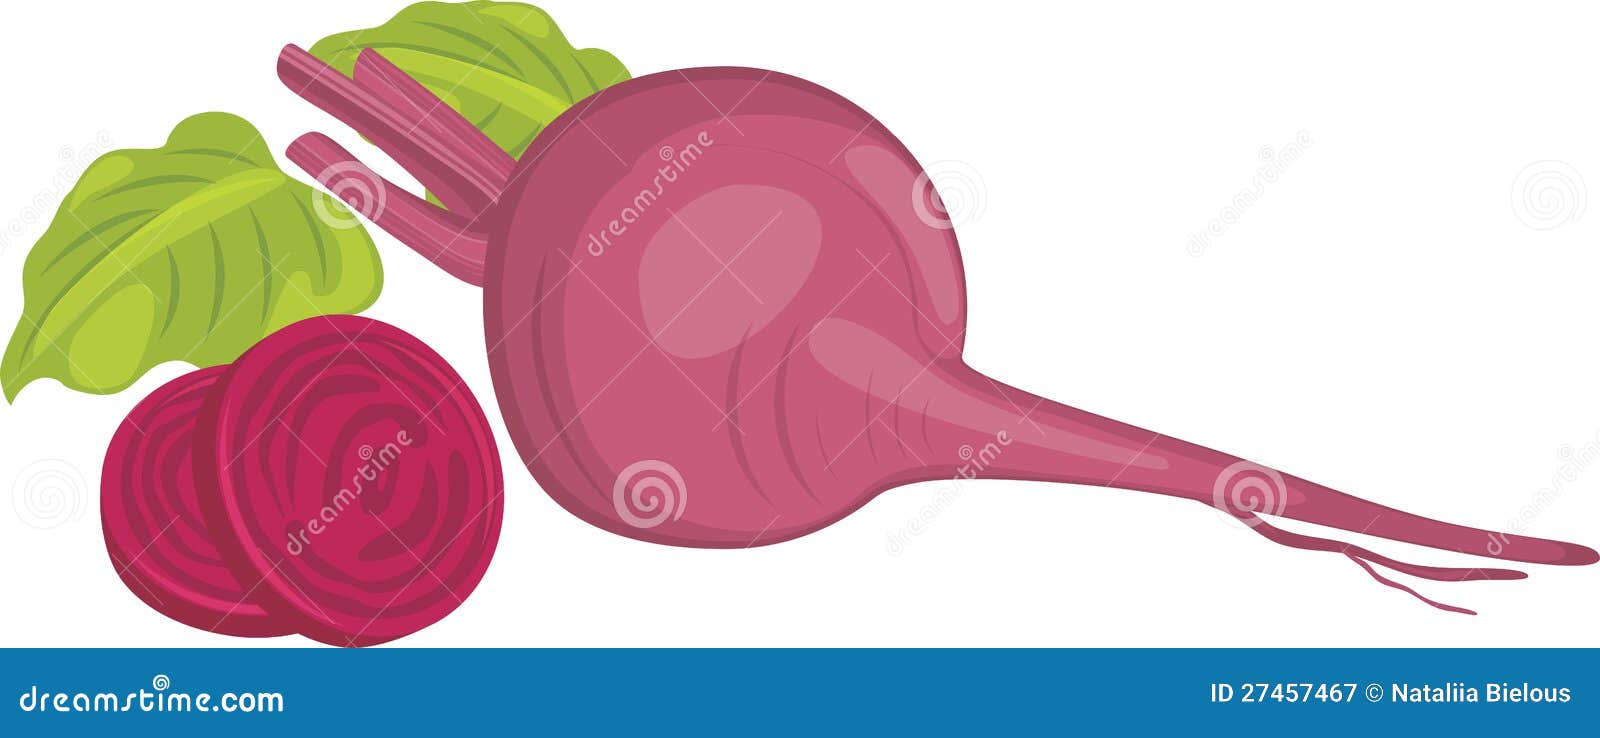 free clipart beets - photo #31